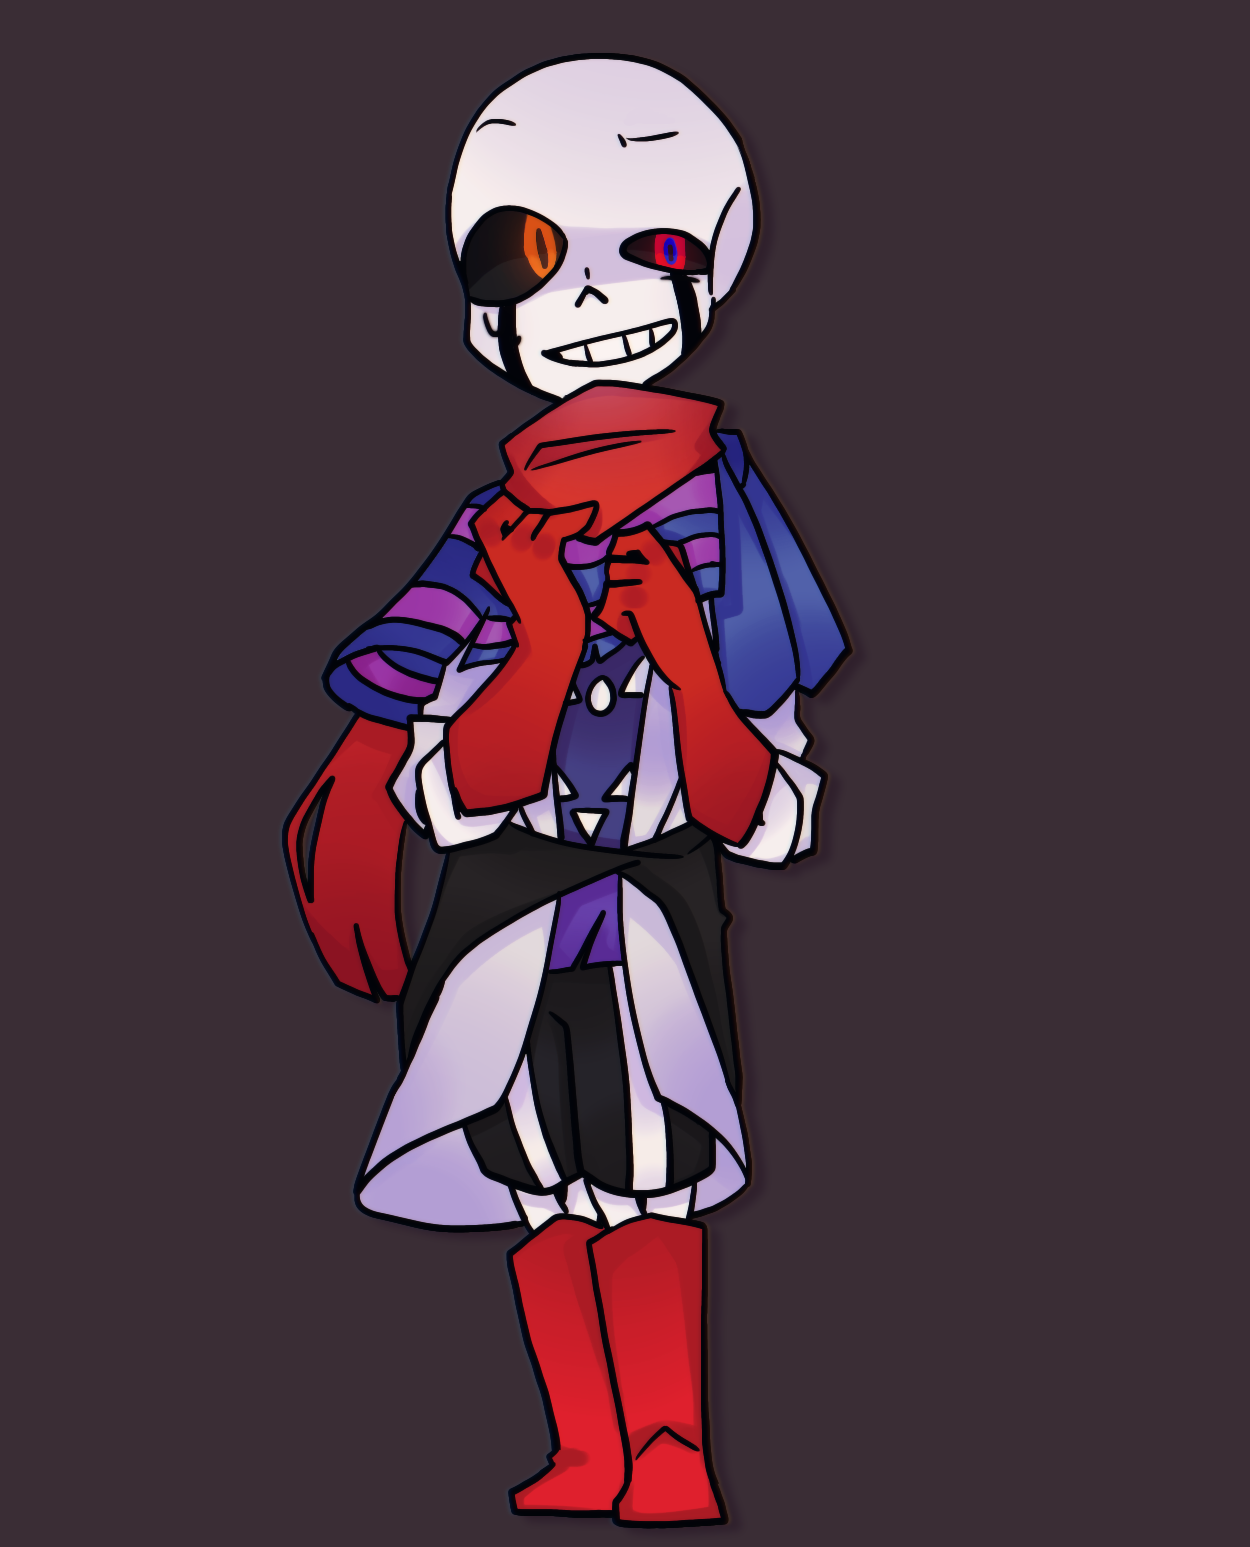 Fanart: Dreamsans! (Inspired by fanfiction One small dream)